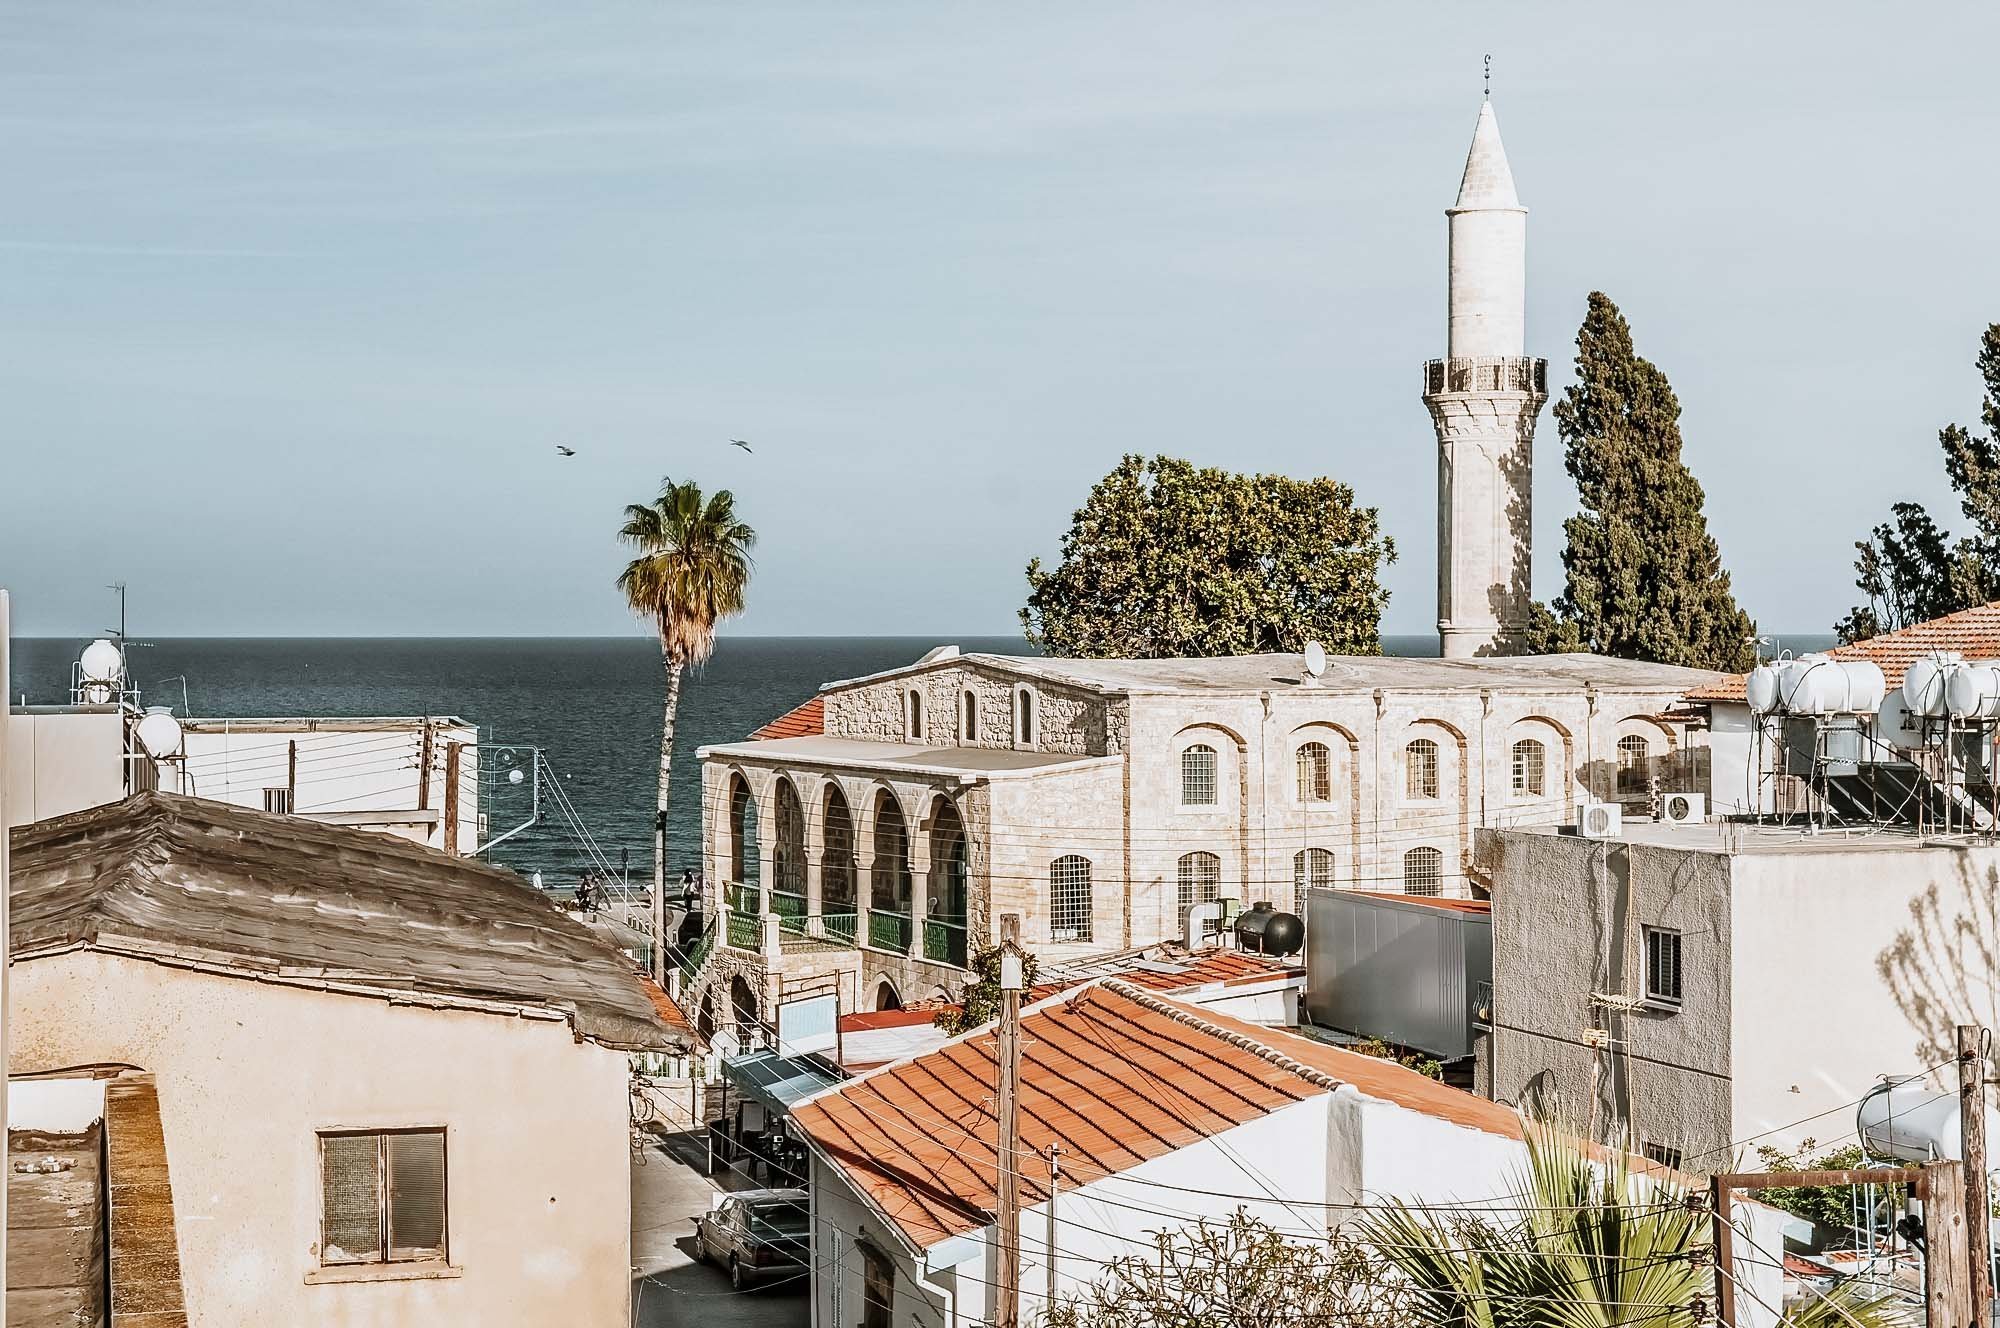 Warm Places in February Europe - Old buildings by the sea and palm trees in Limassol